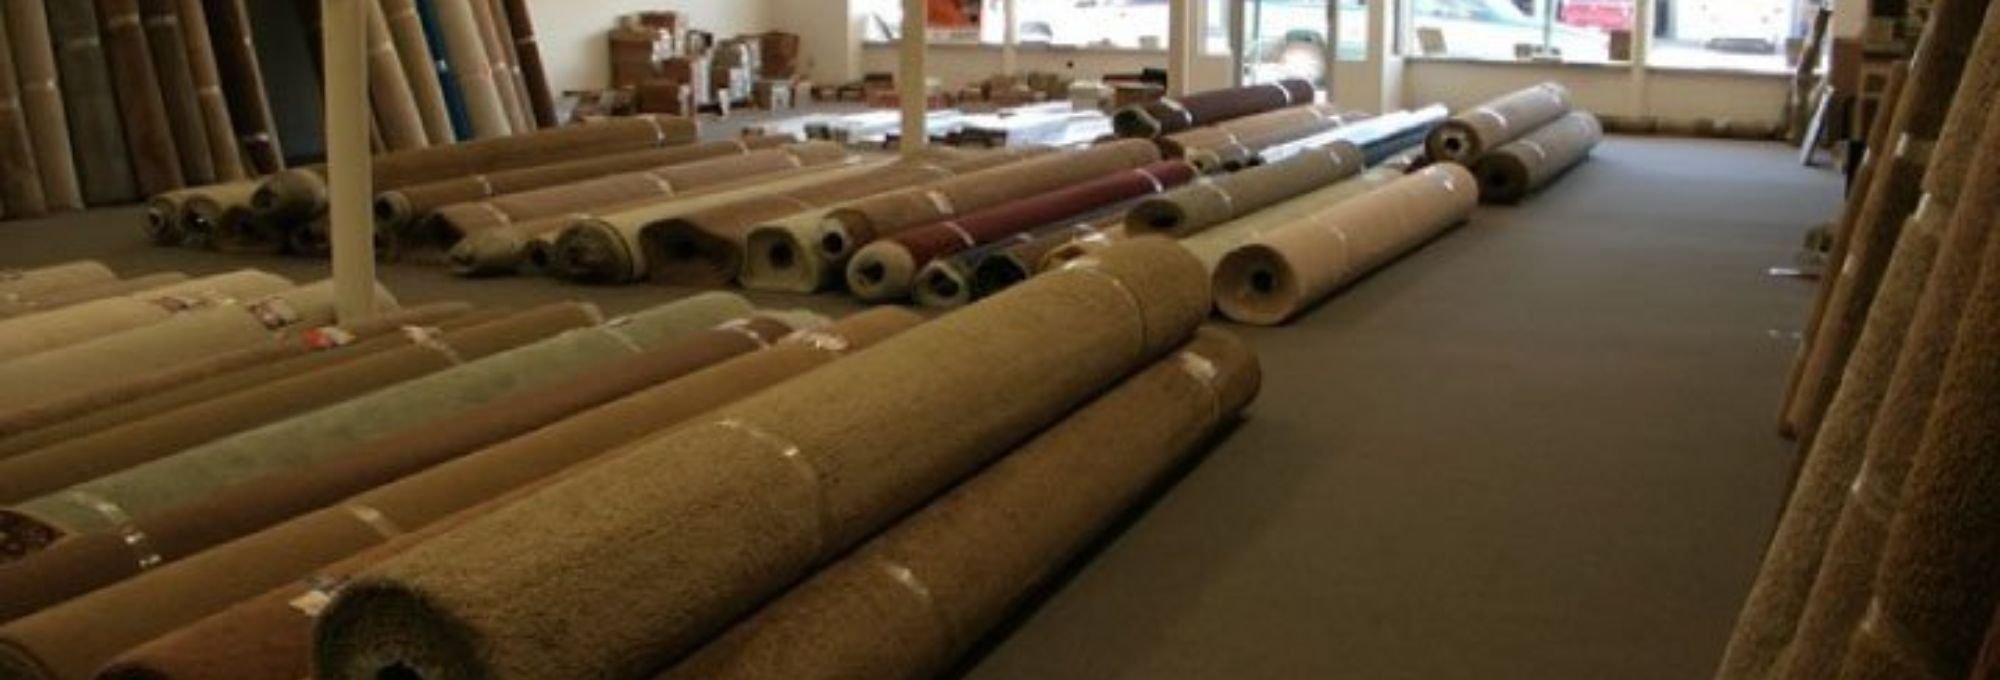 Carpet rolls in showroom from Carpet Plus in the Worthington, MN area